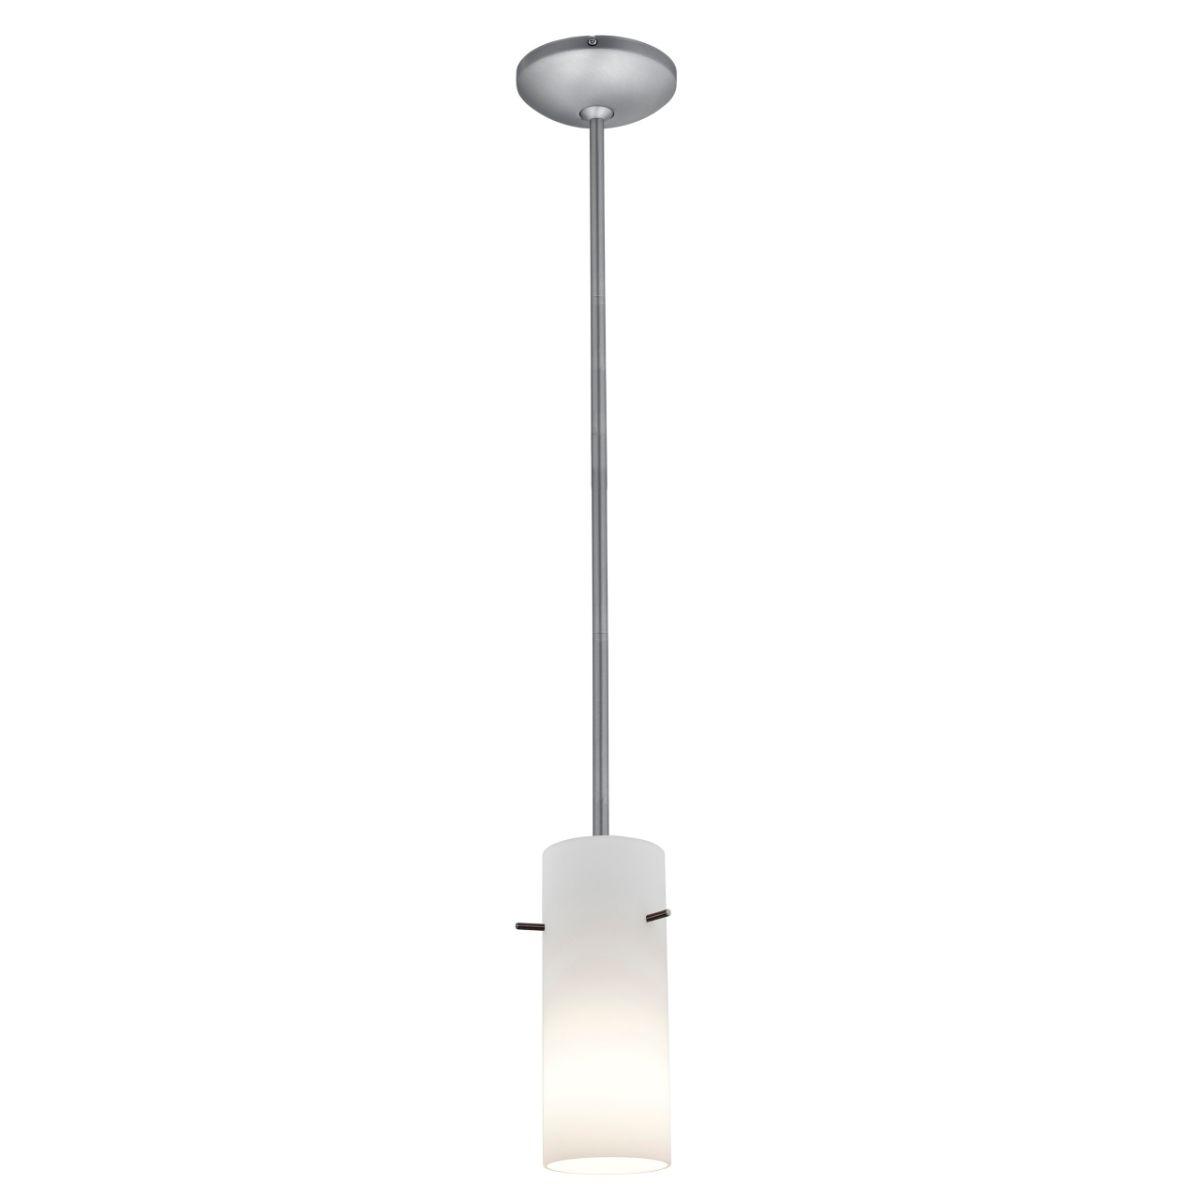 Cylinder 4 in. Pendant Light, Opal Glass - Bees Lighting